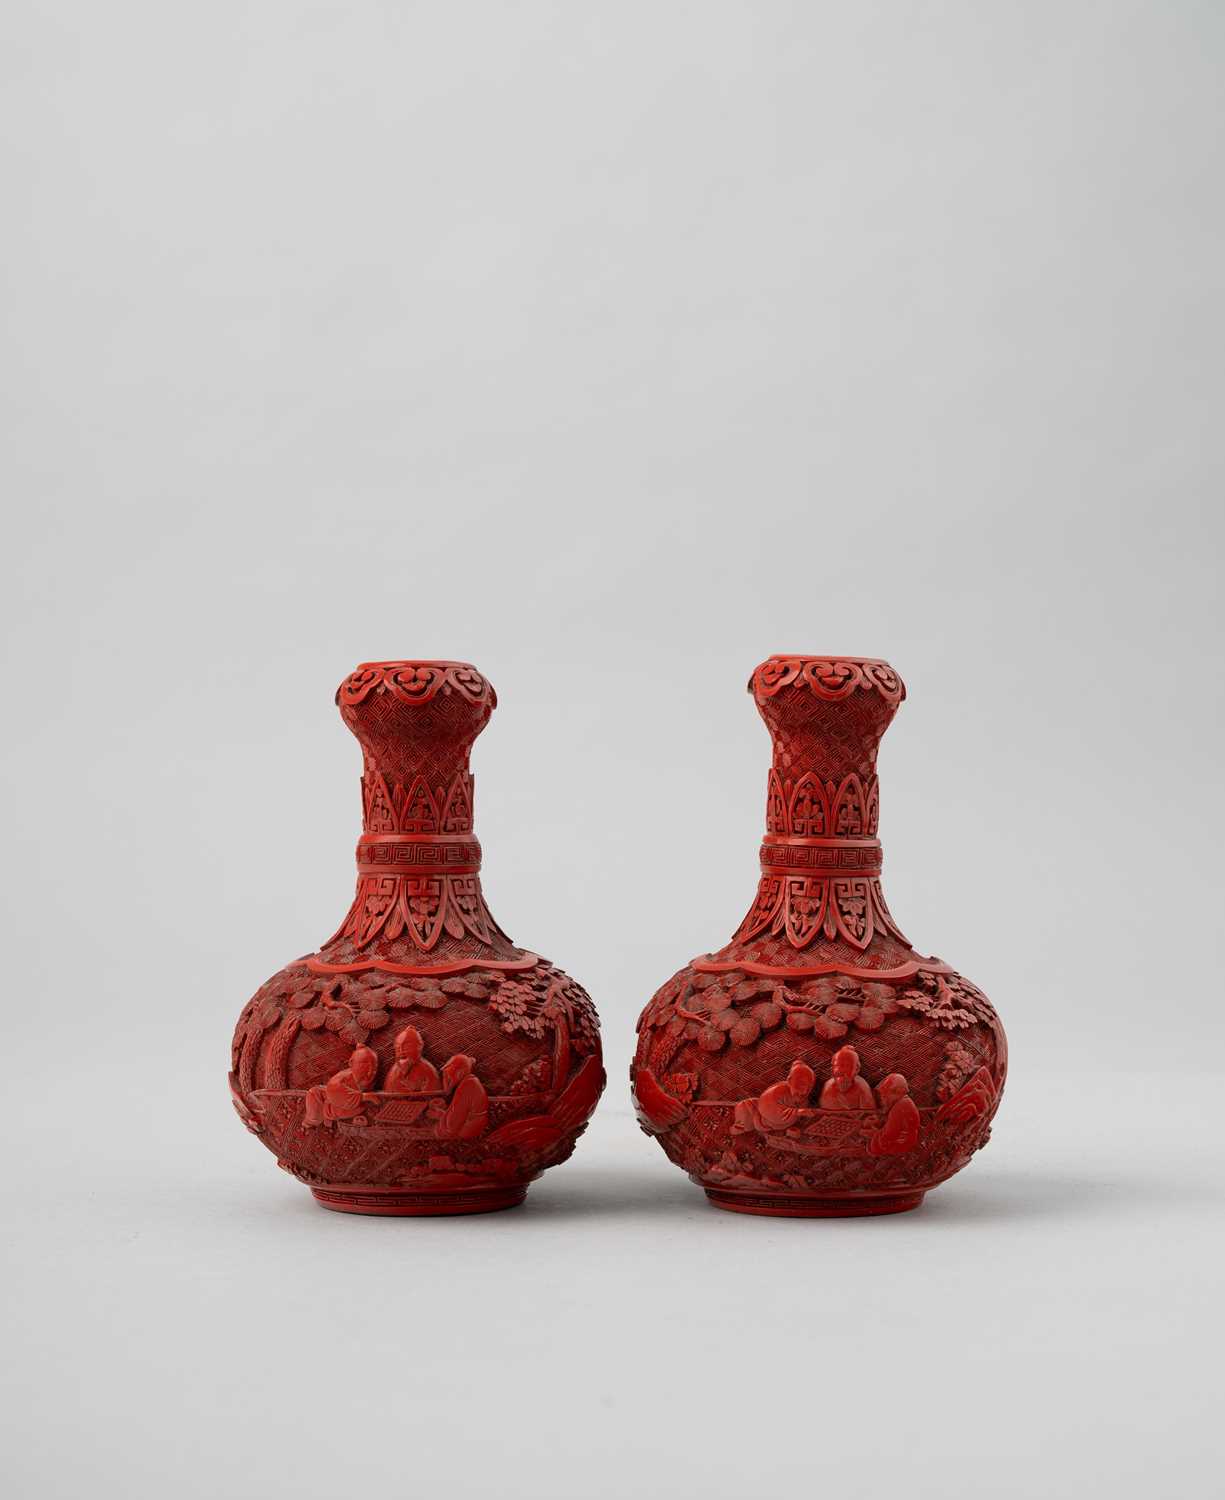 A PAIR OF SMALL CHINESE CINNABAR LACQUER 'SEVEN SCHOLARS' BOTTLE VASES QIANLONG 1736-95 The globular